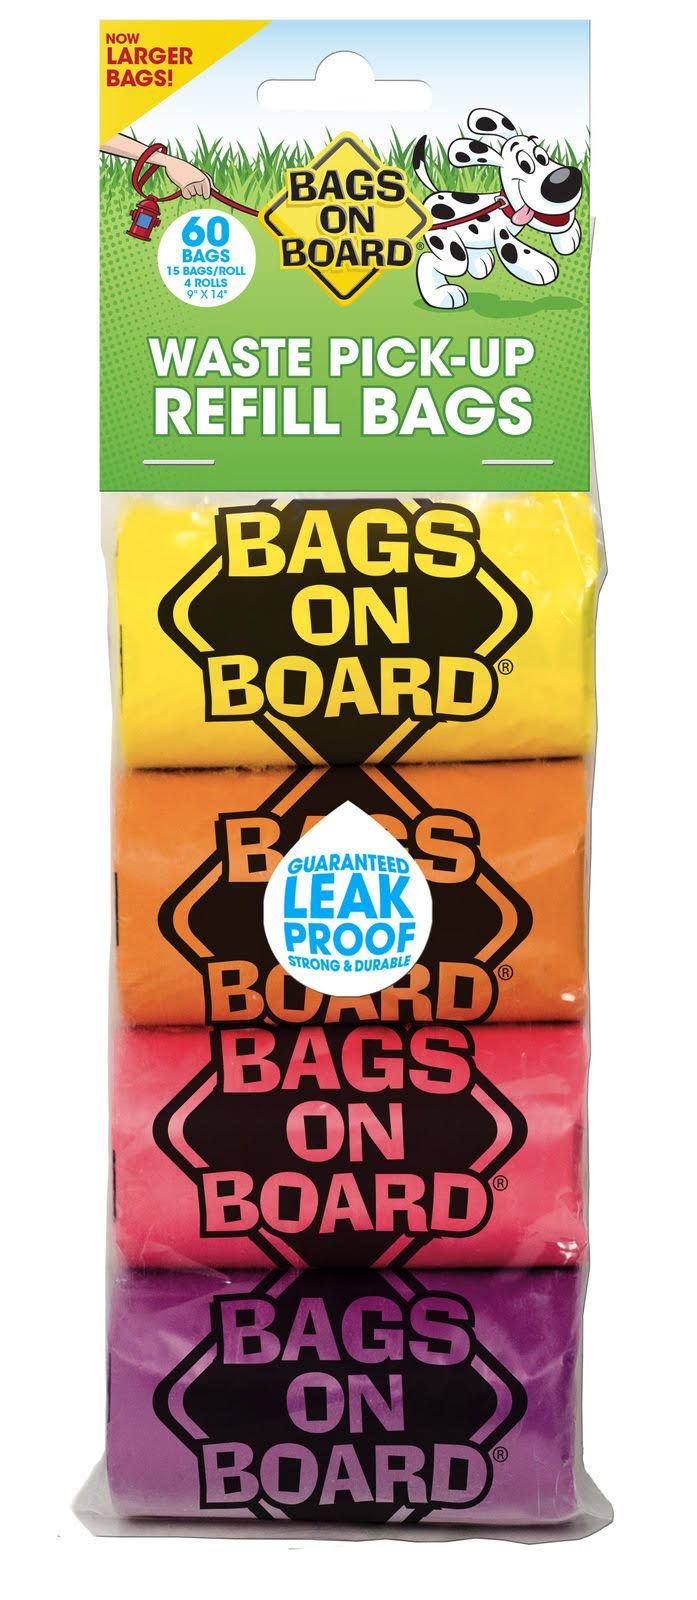 Bramton Bags On Board Waste Pick-Up Refill Bags - 60 Bags